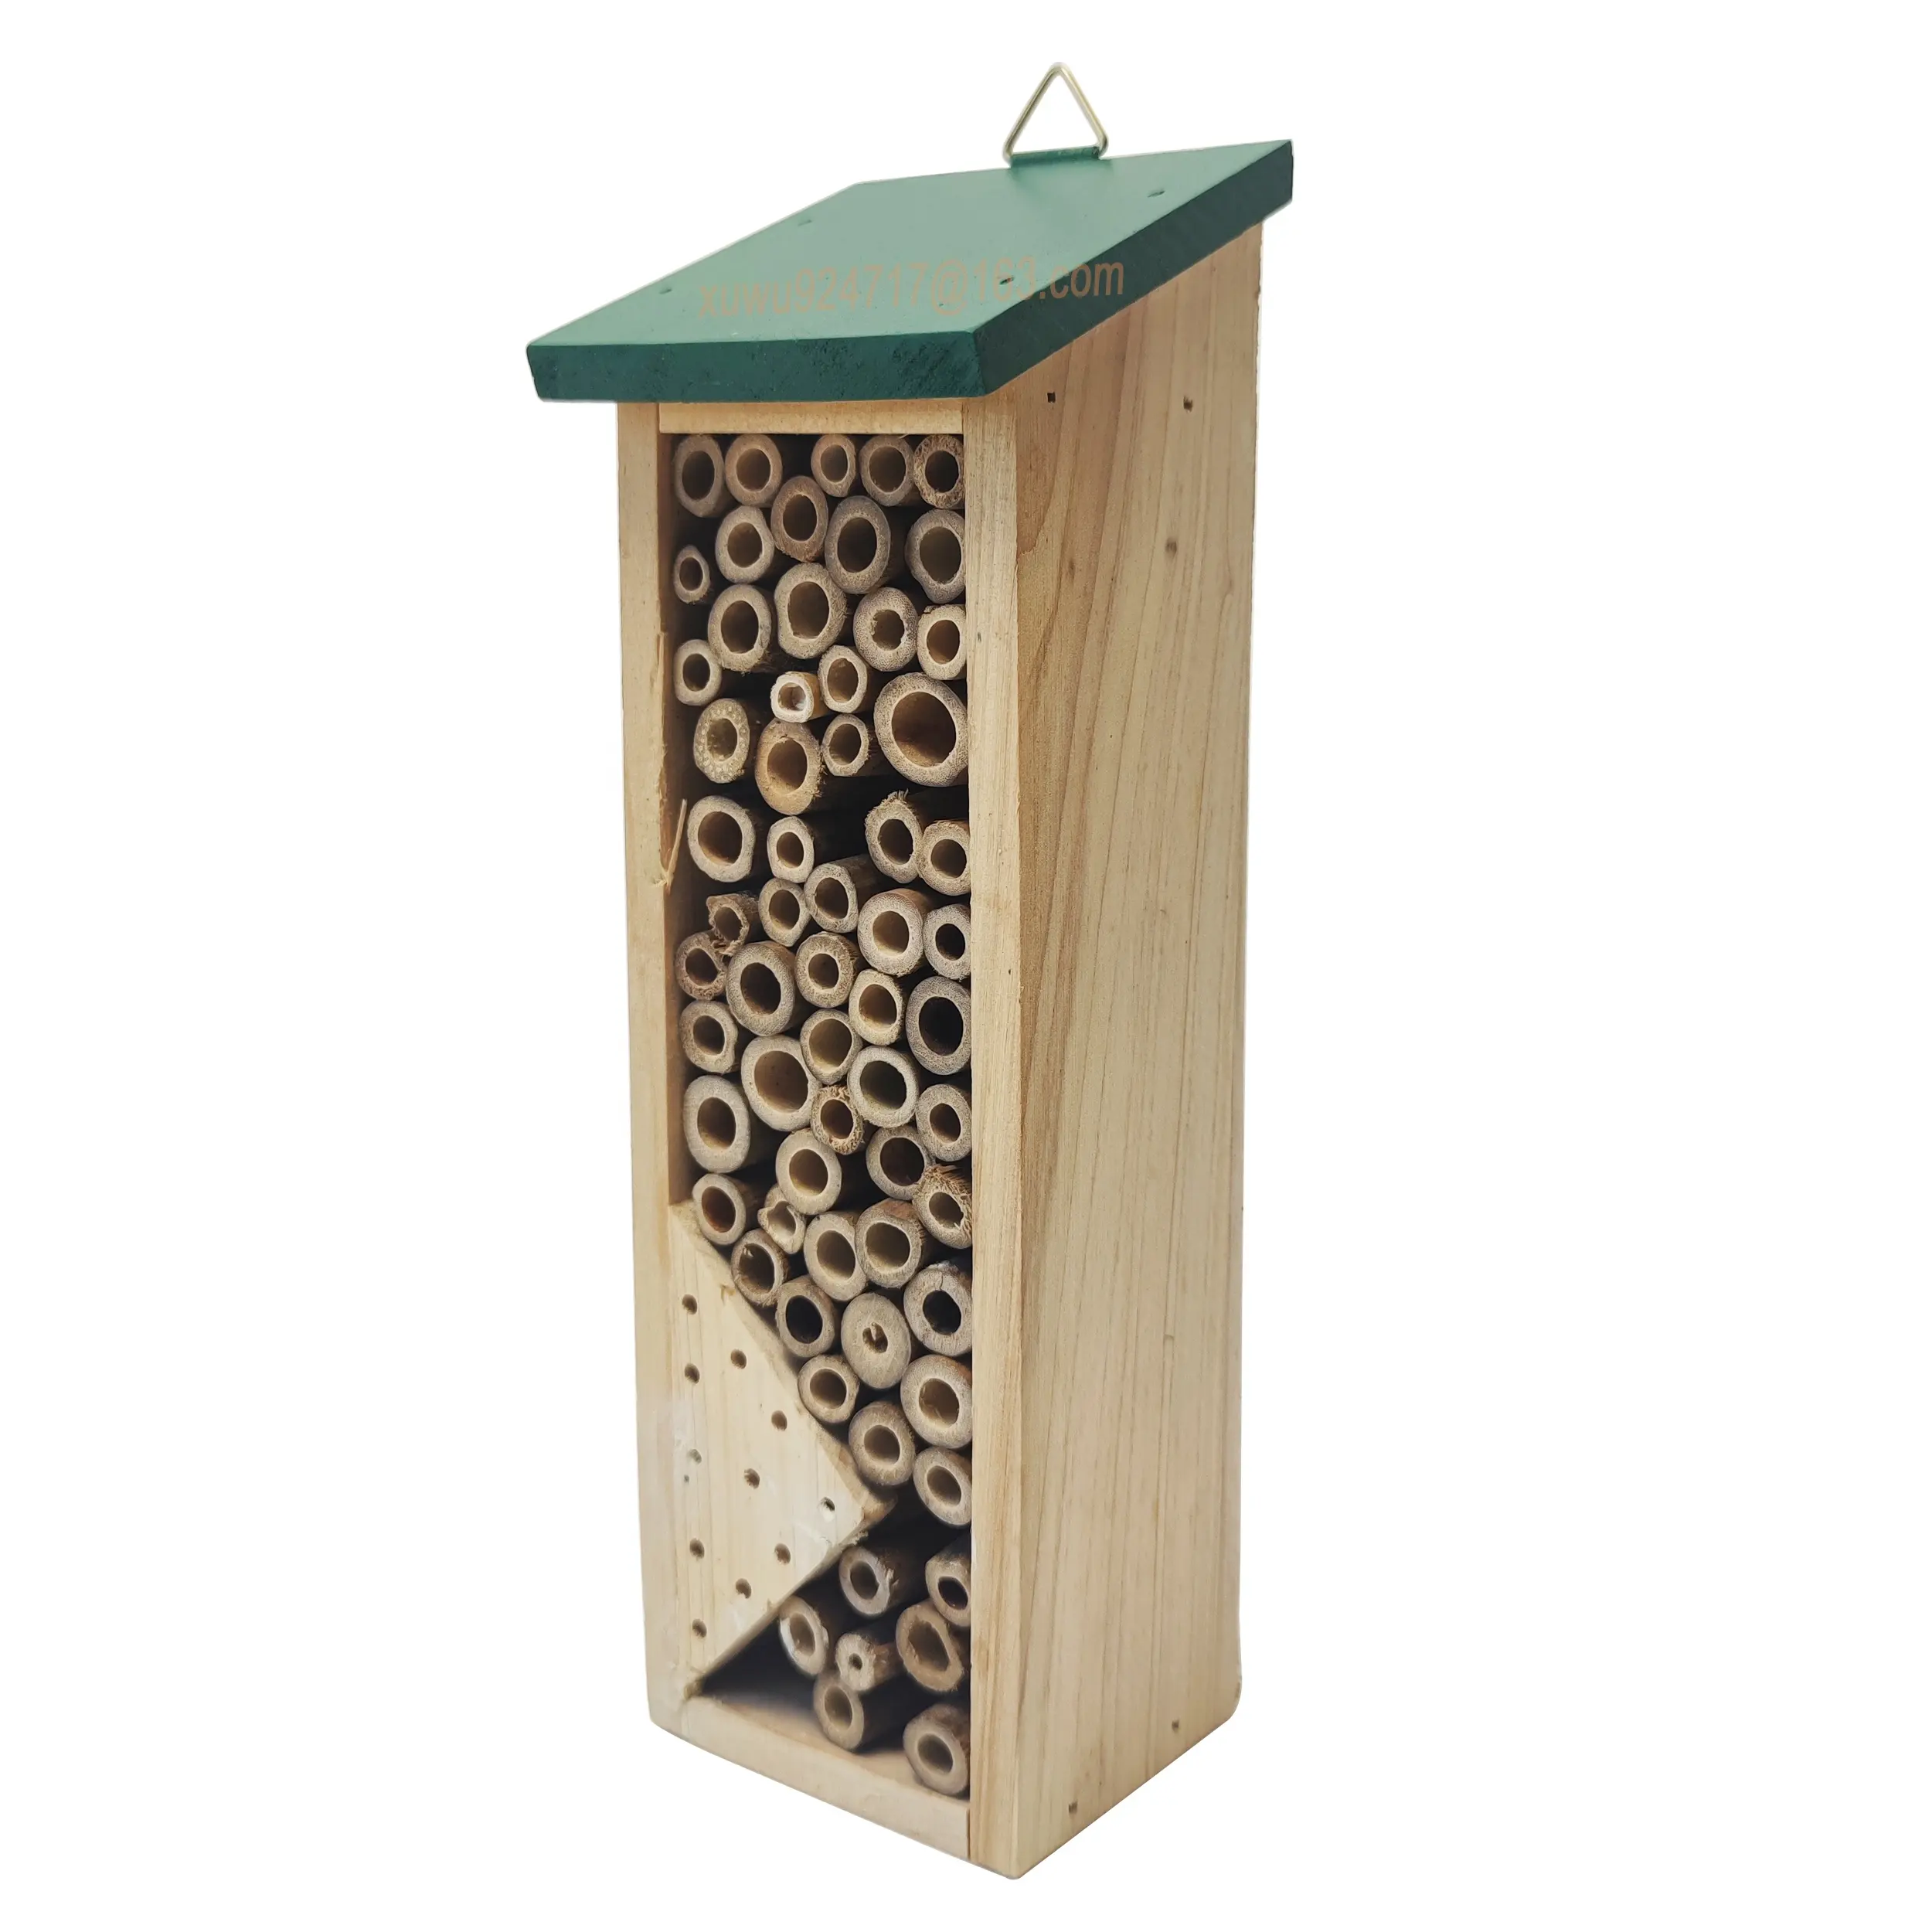 Solid Wood Garden Box Insect Pets Feeder Carrier Nice Insect House Hotel Cages Outside Butterfly Bird Bee Insect Box Nest